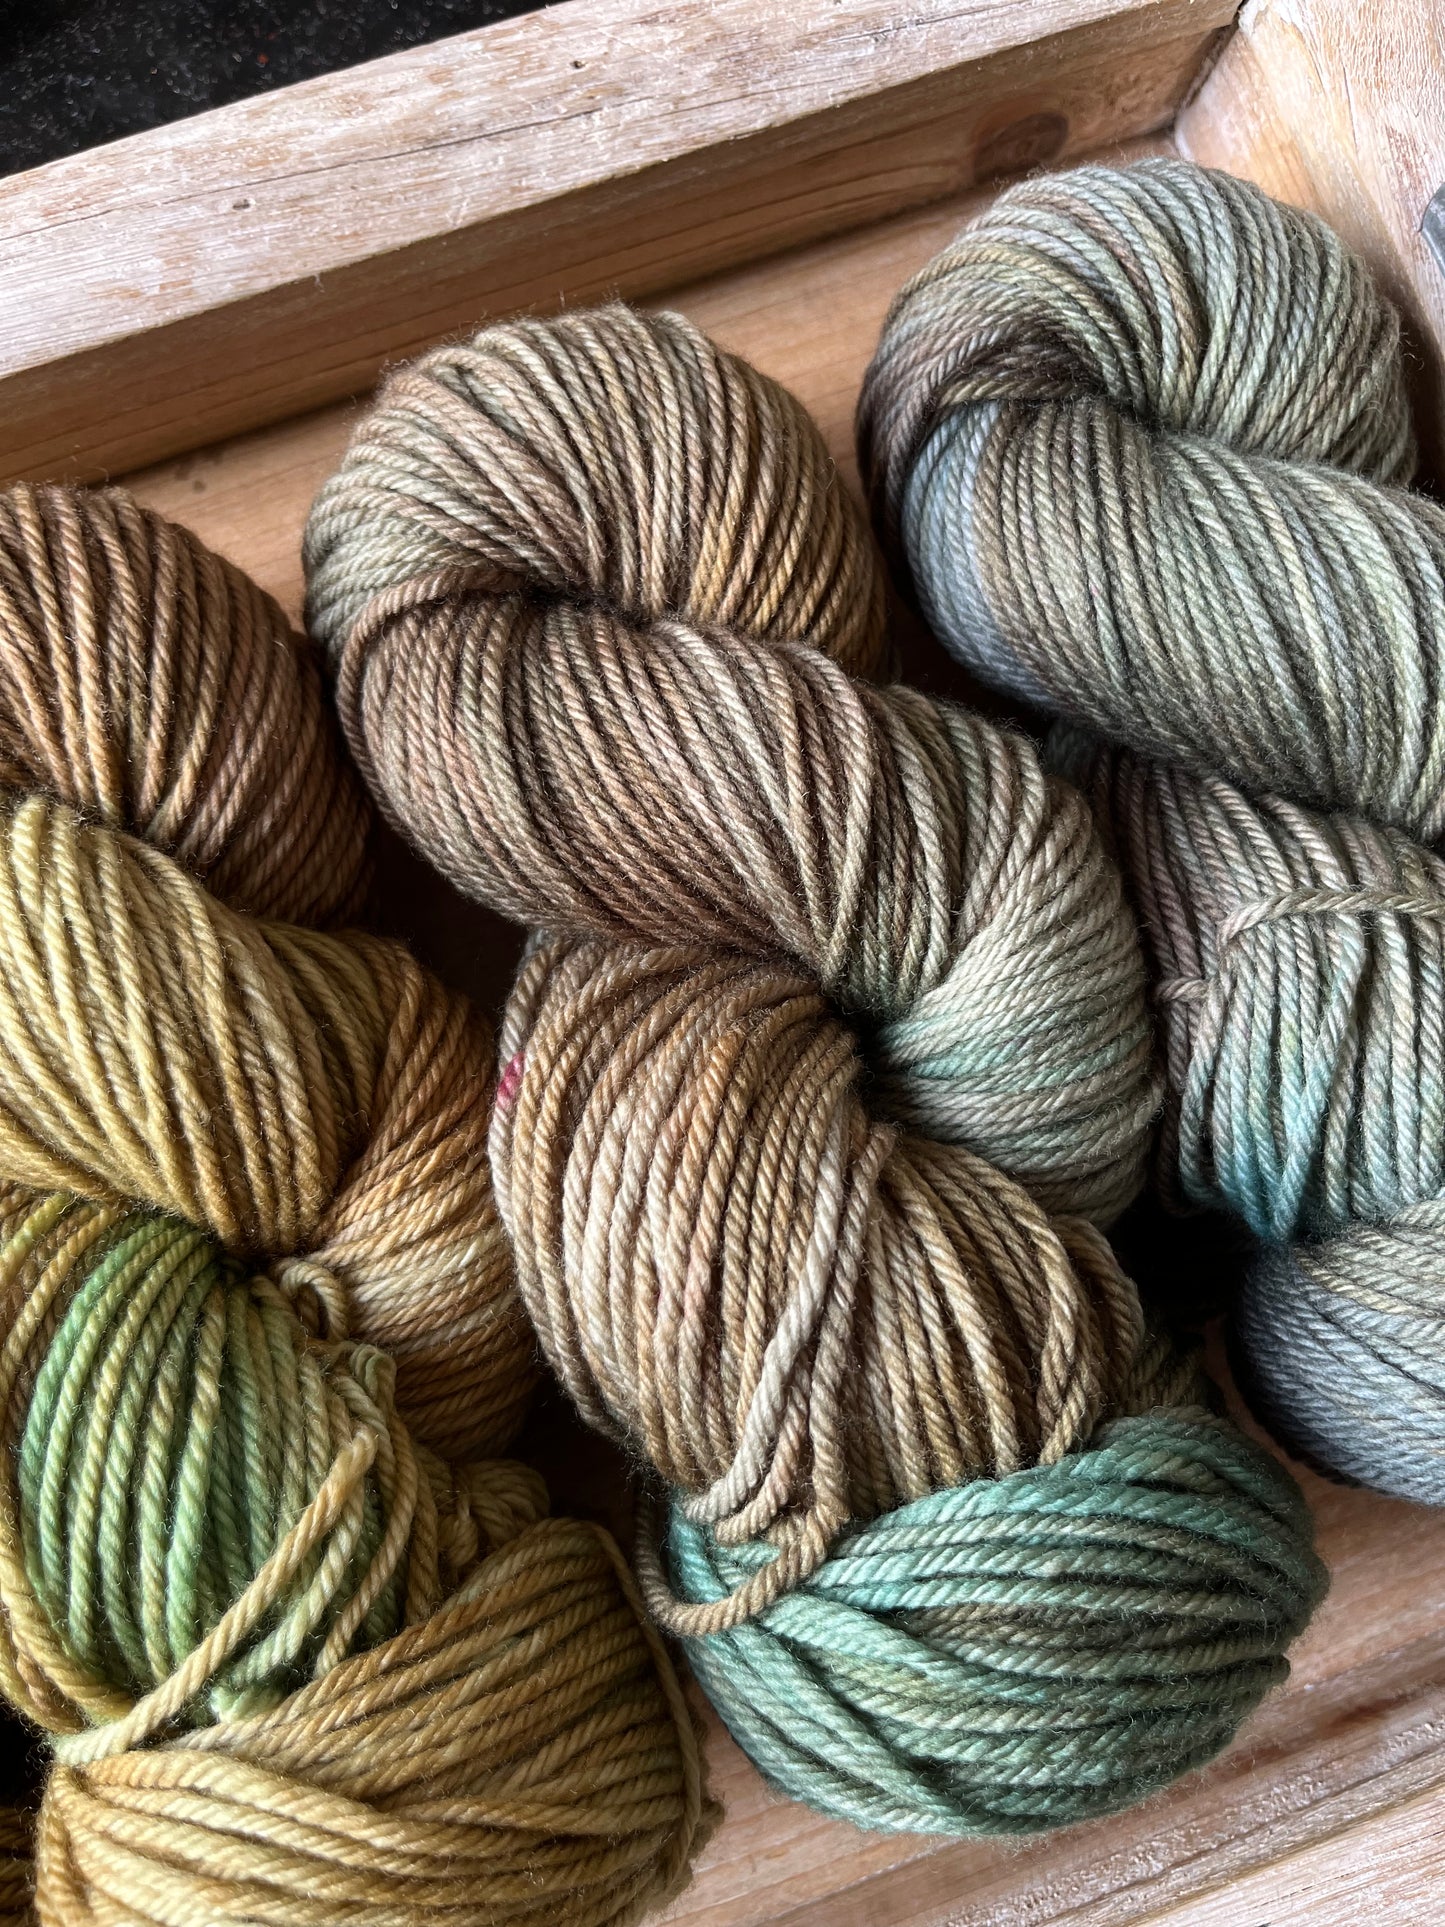 5 Skein Yarn Fade on Classic Worsted Base